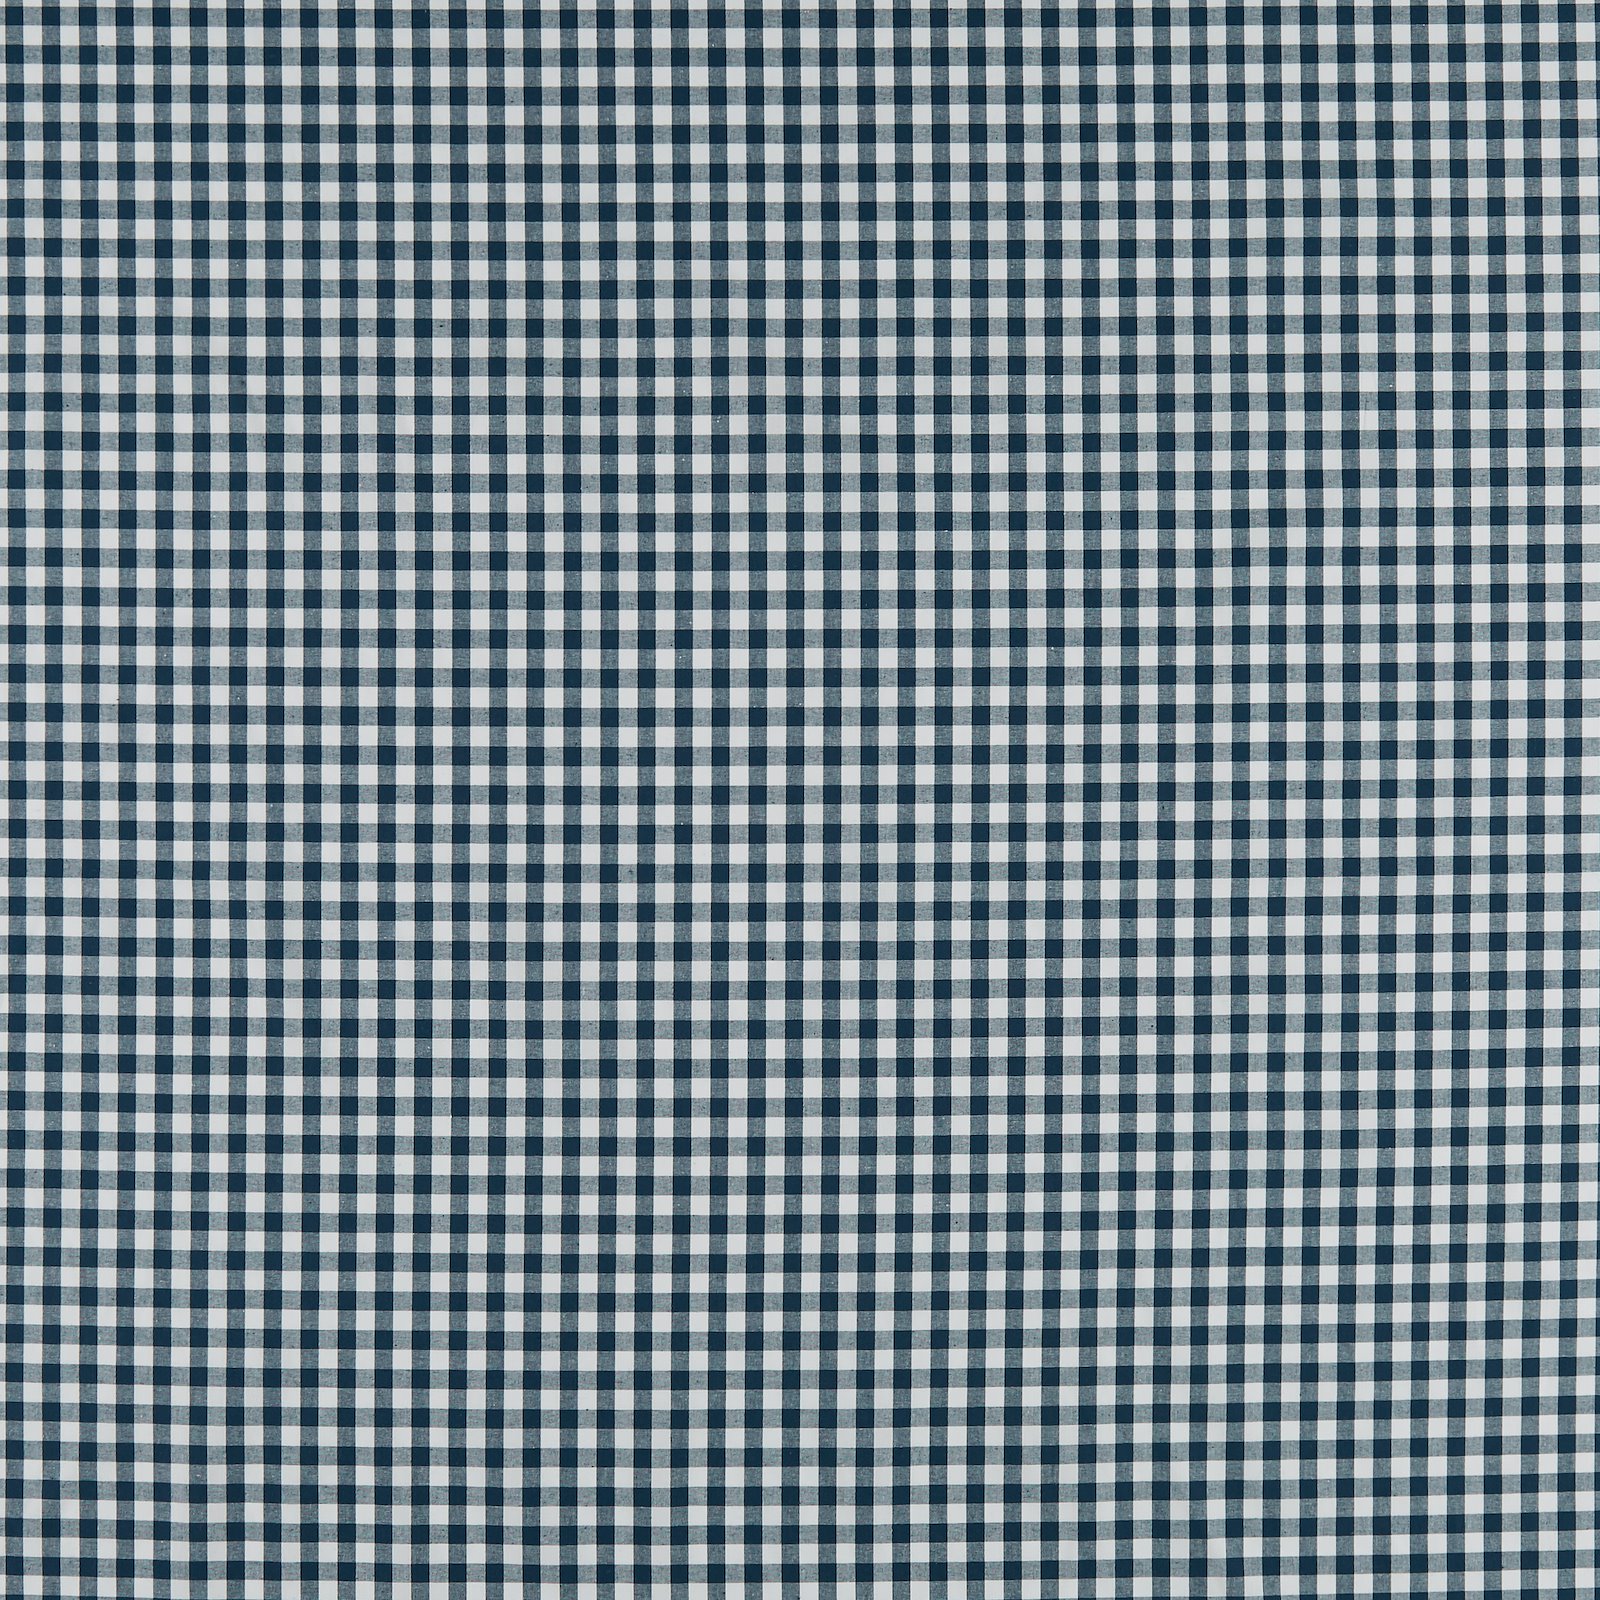 Cotton yarn dyed navy/white check 780908_pack_sp